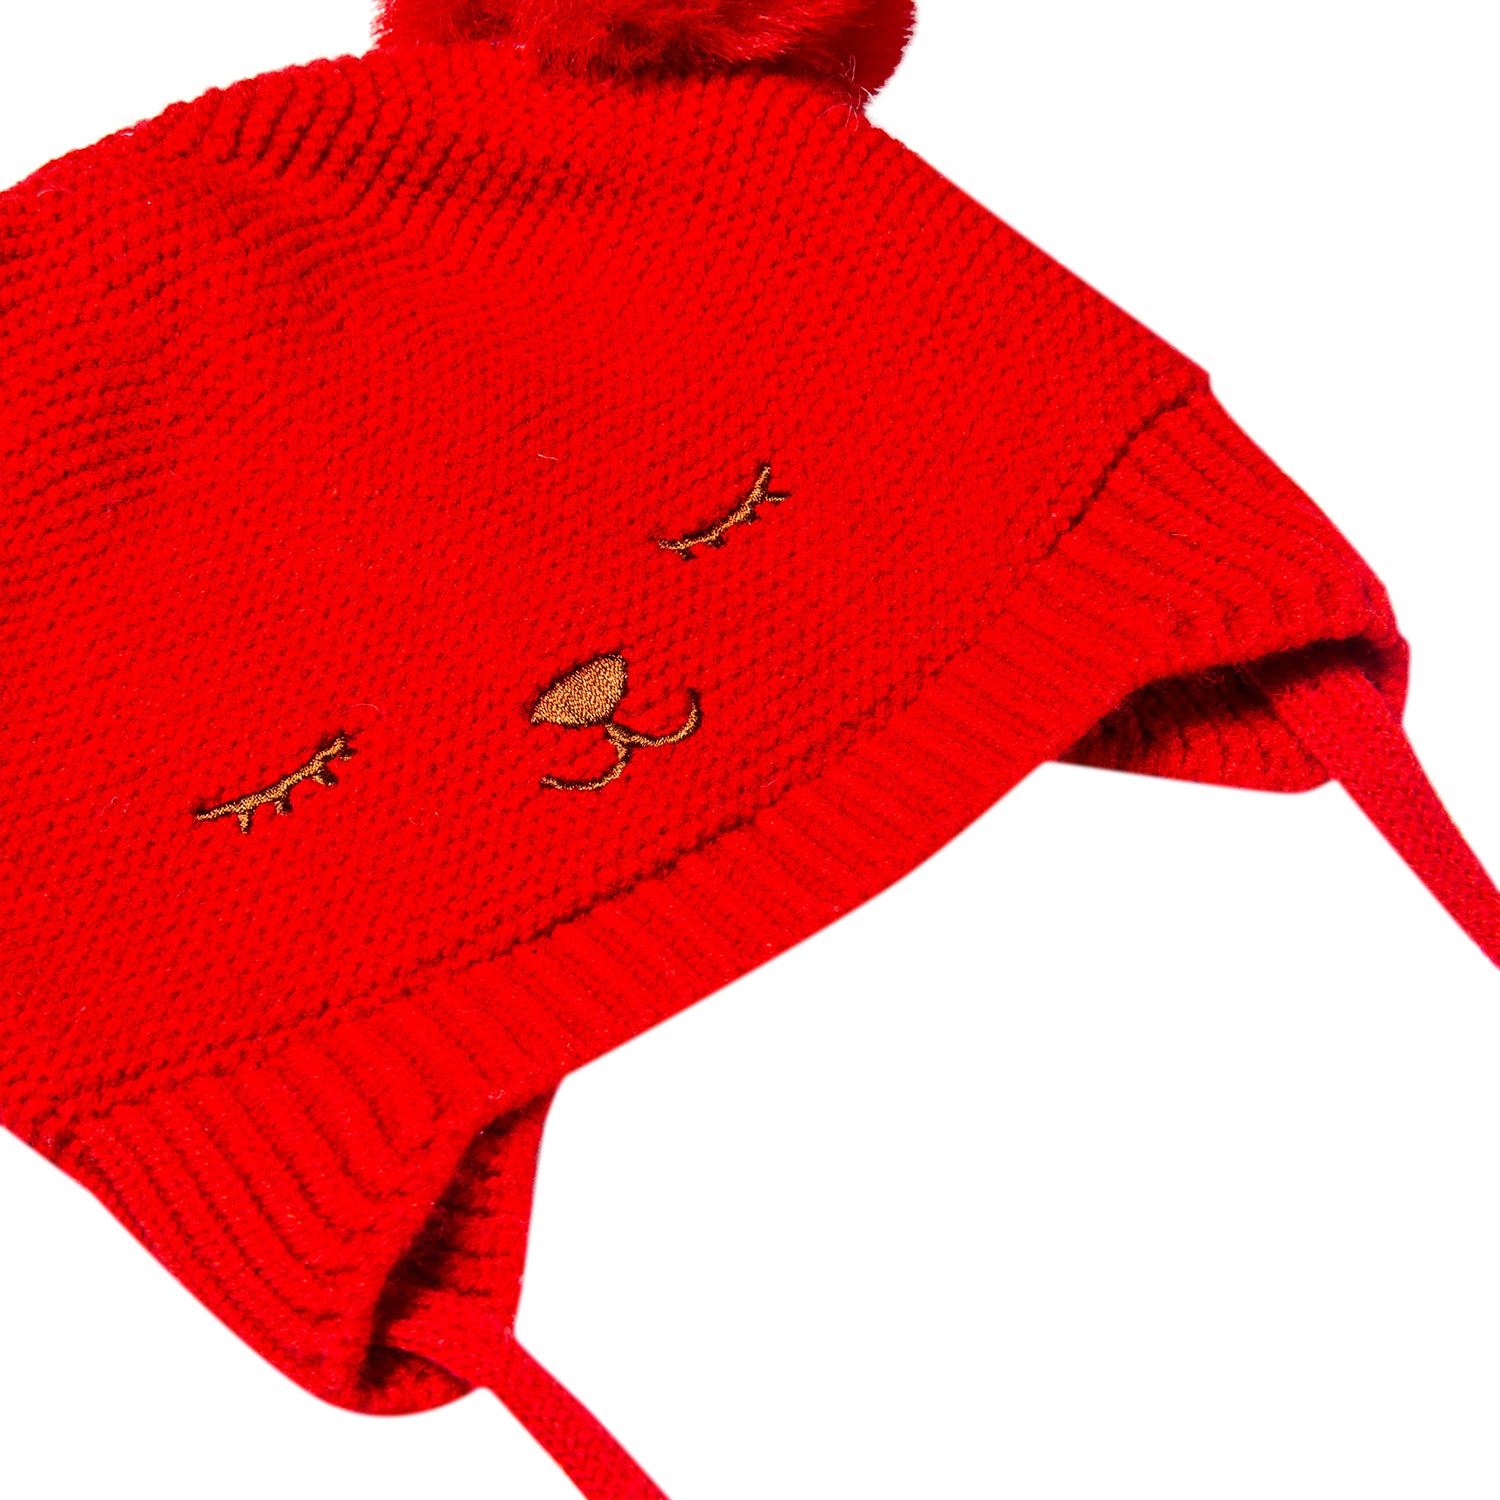 Baby Moo Knit Woollen Cap With Tie Knot For Ear Cover Sleeping Pom Pom Red